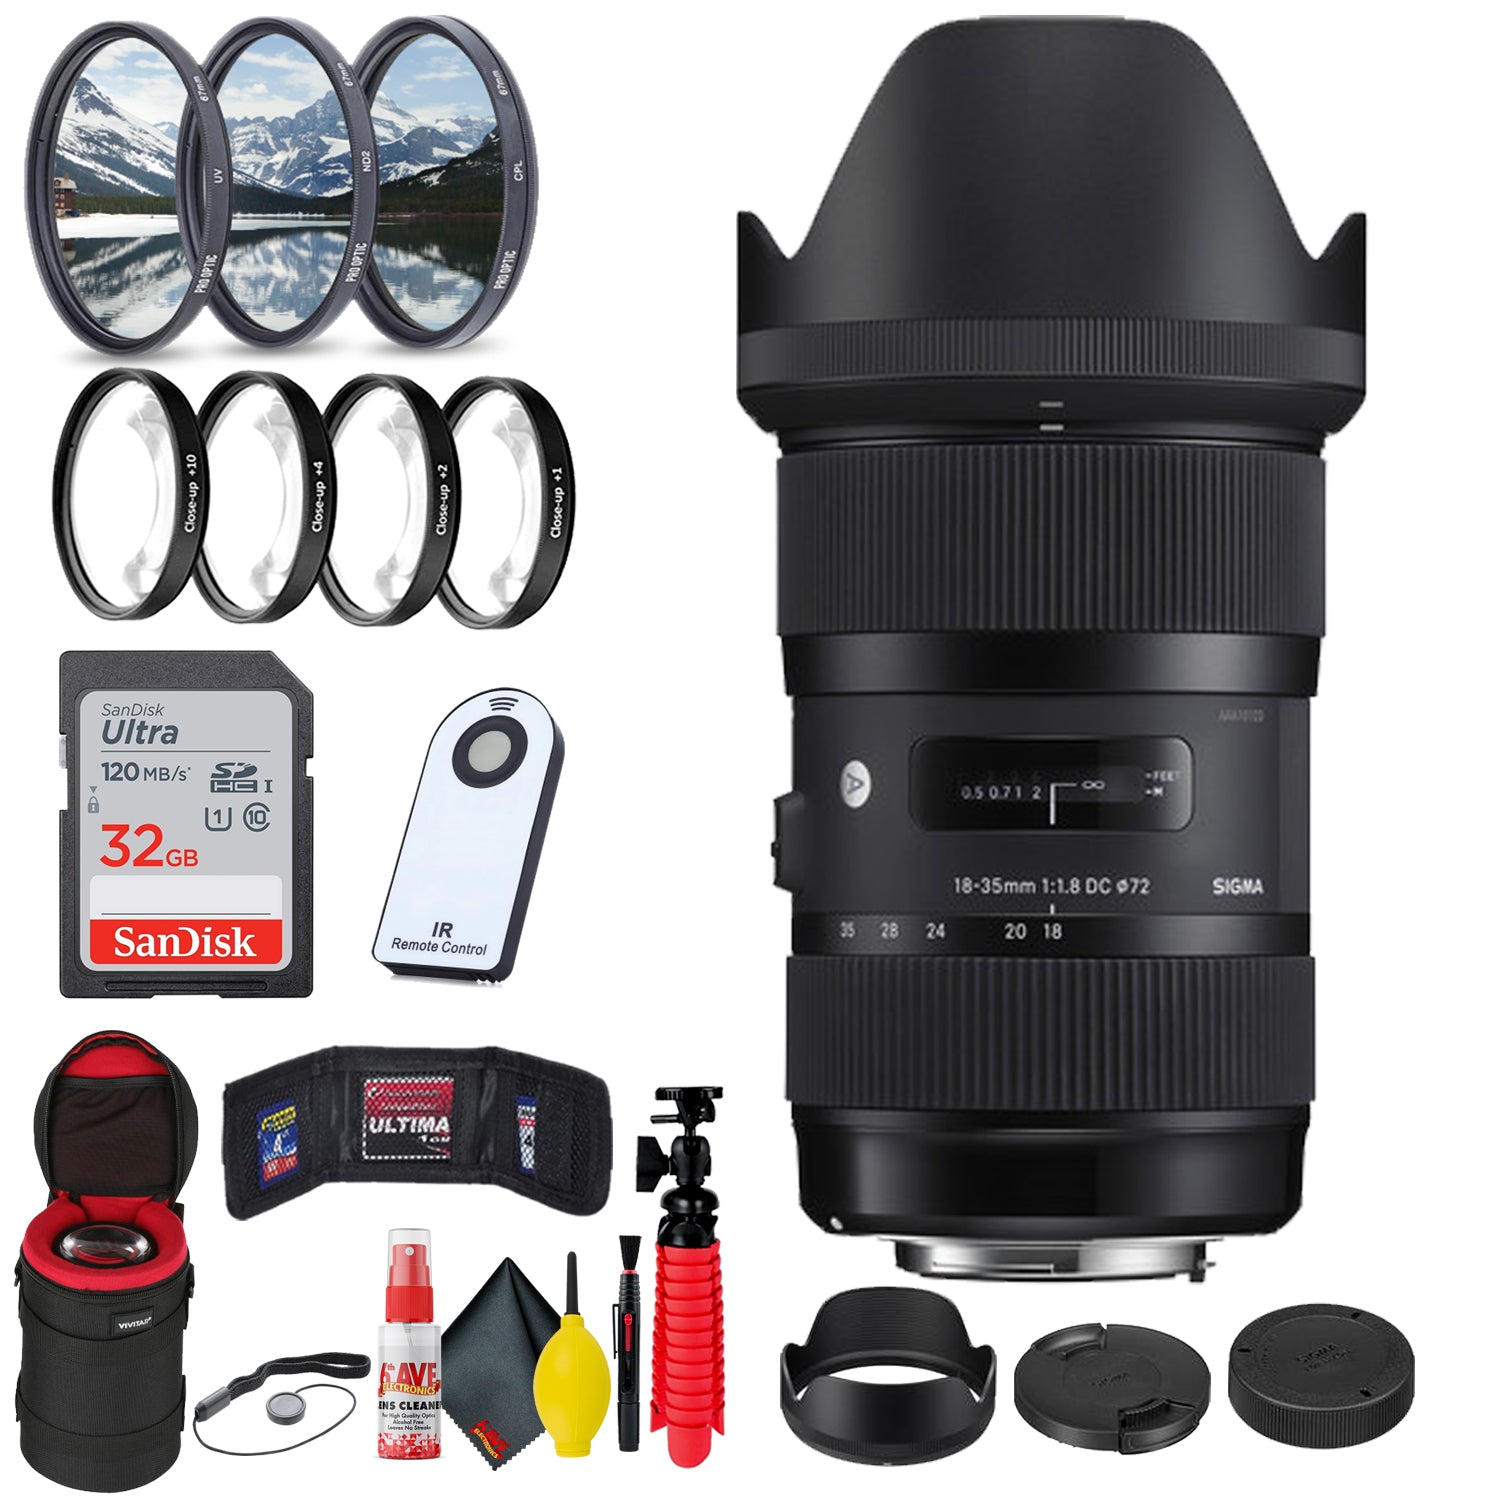 Sigma 18-35mm f/1.8 DC HSM Art Lens for Canon EF + 32GB SD Card Bundle